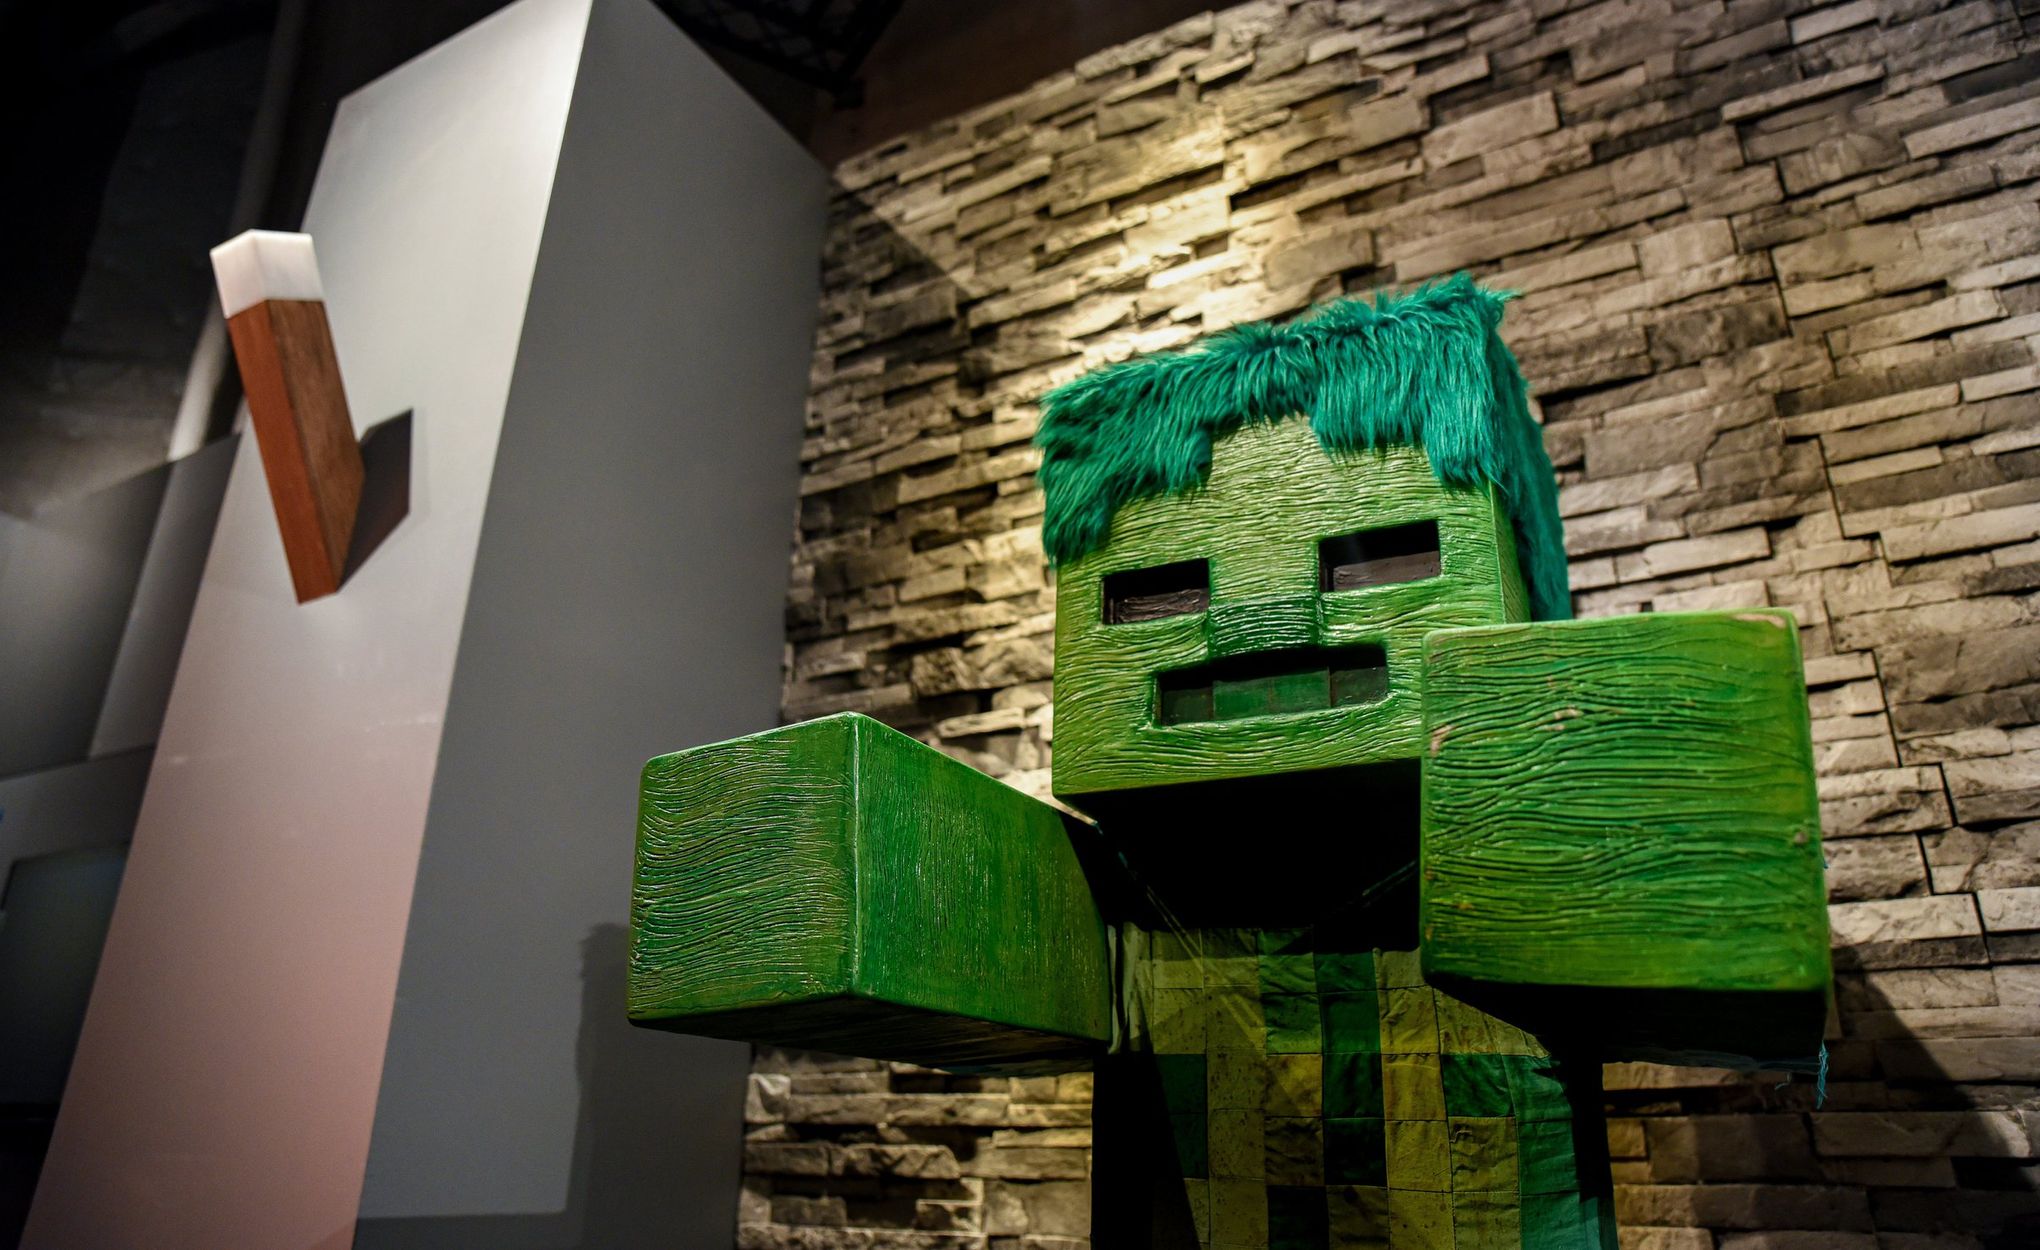 Make Google make a Minecraft Google doodle for it's 10th birthday